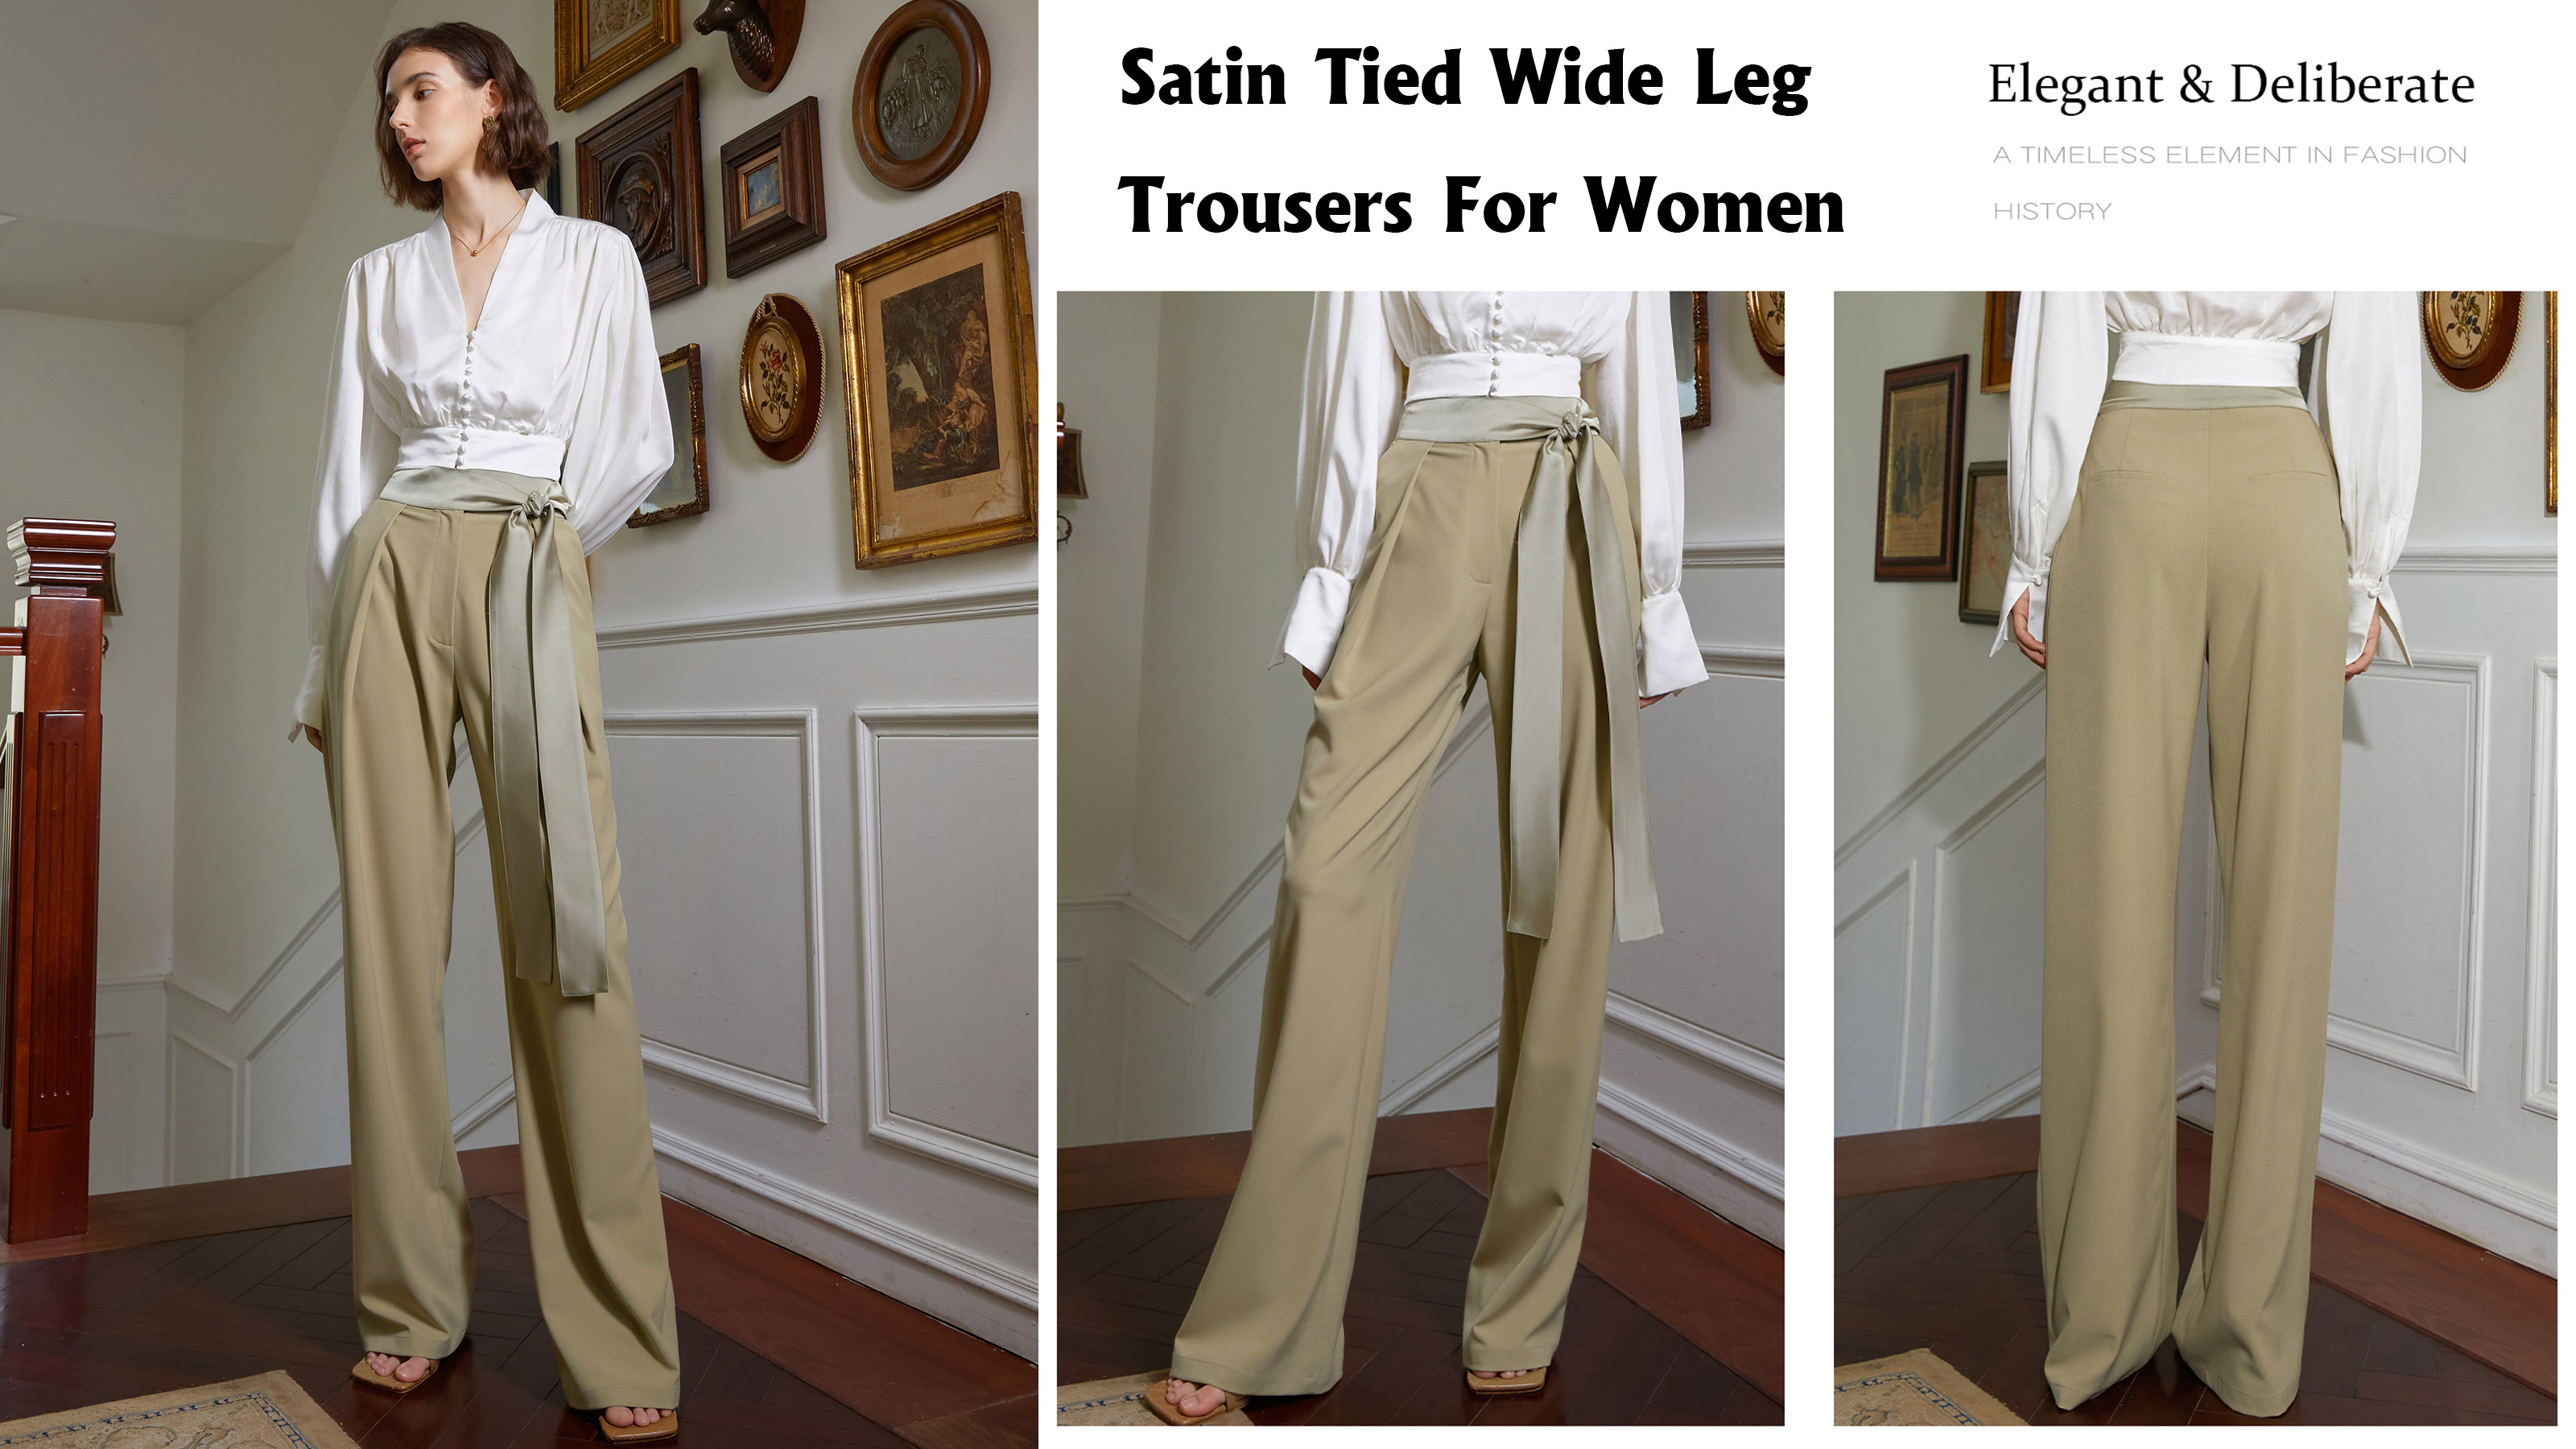 Satin Tied Wide Leg Trousers For Women